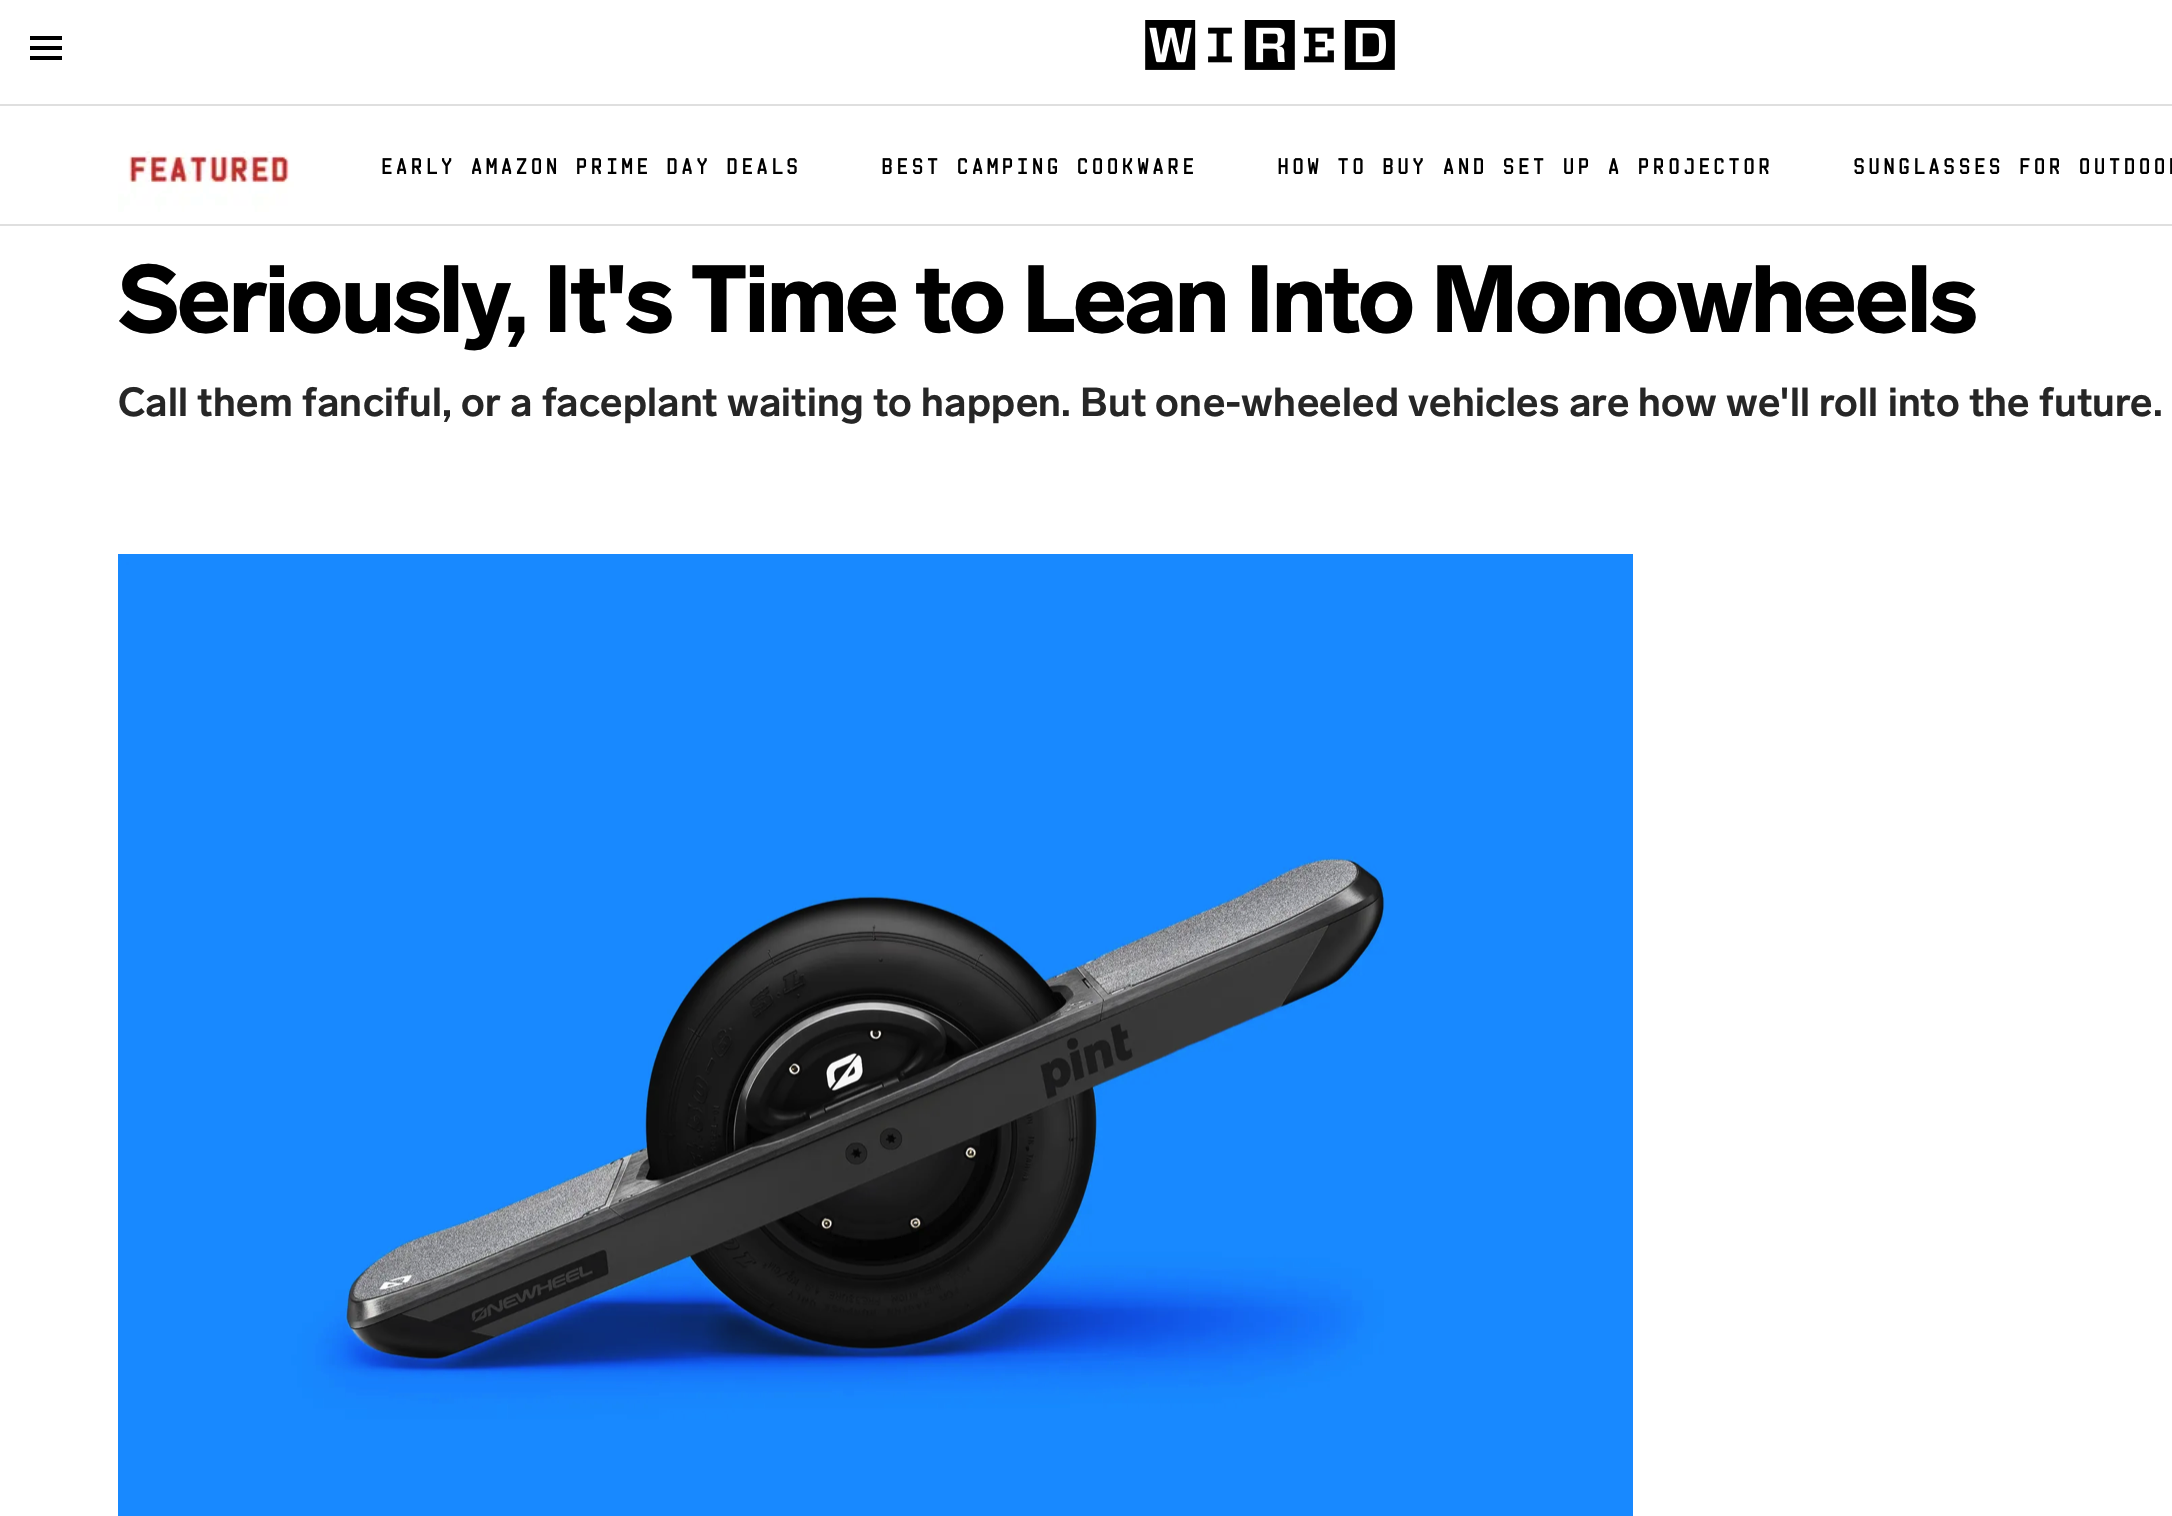 Seriously, It's Time to Lean Into Monowheels